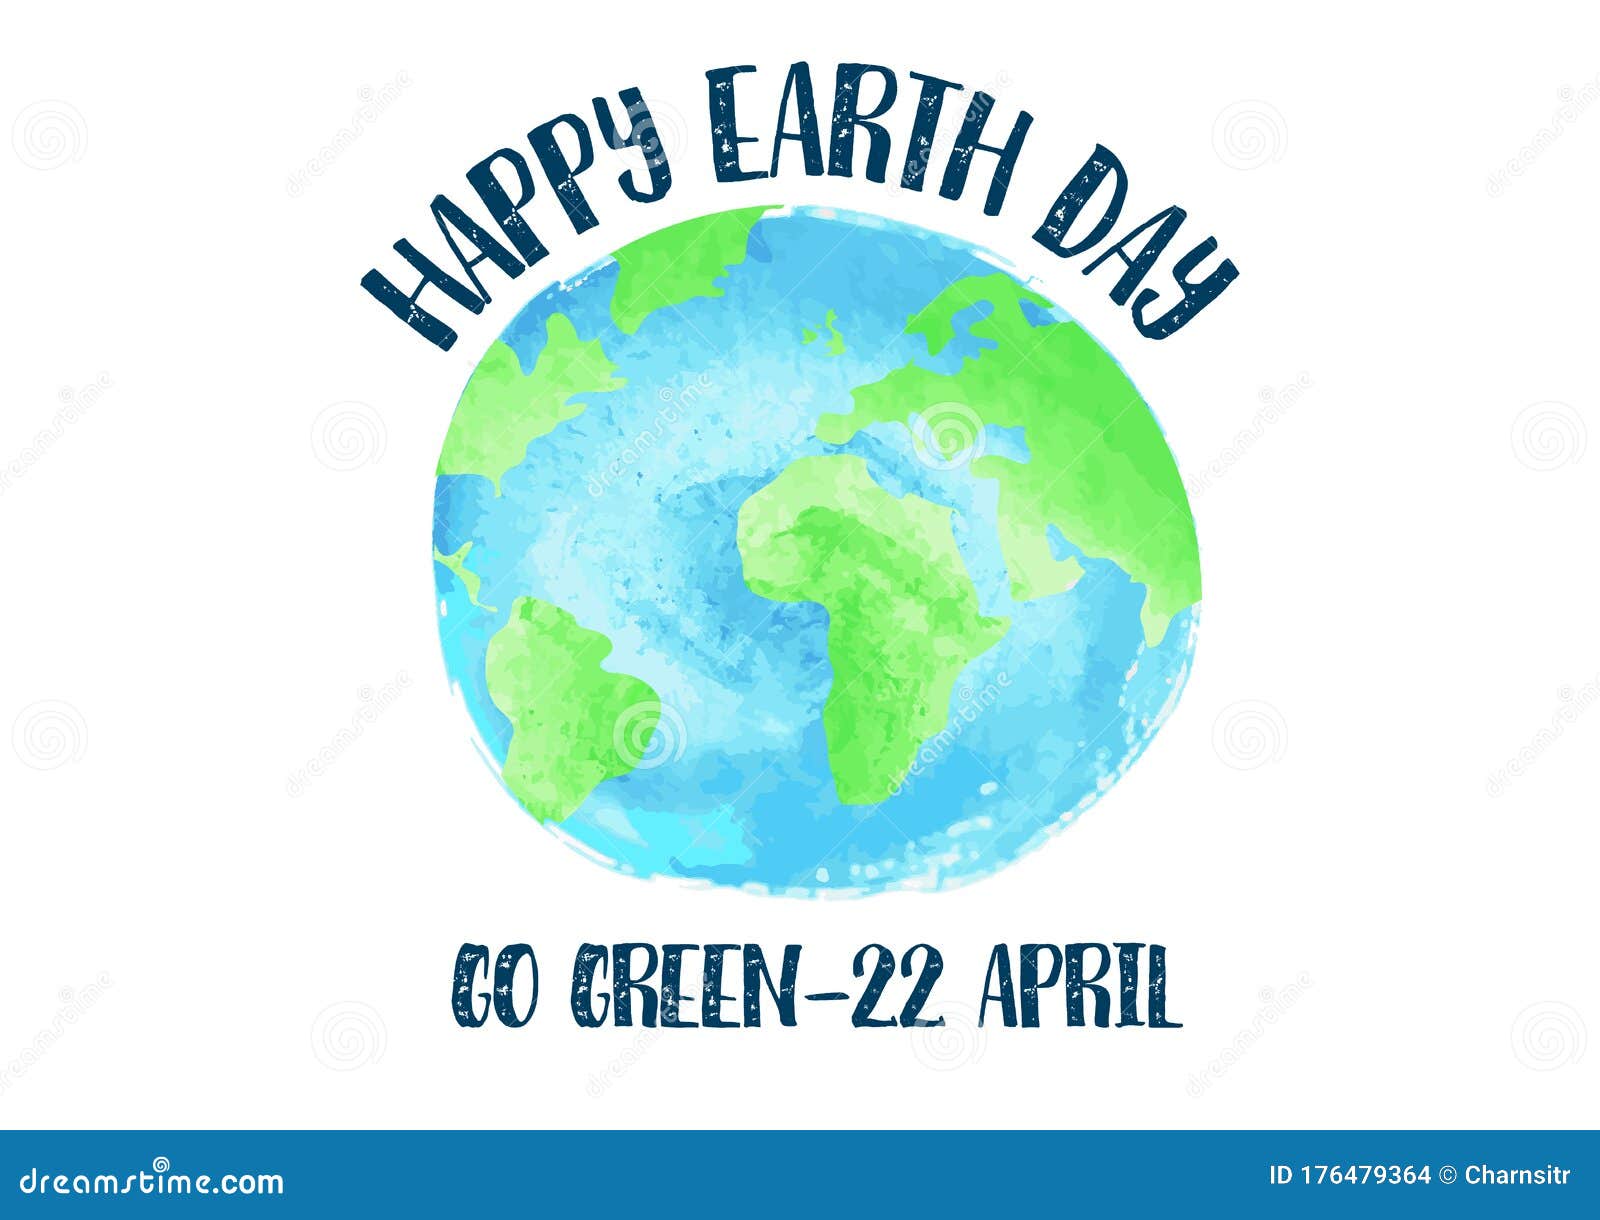 The Earth is surrounded by flowers, Happy Earth Day. Vector